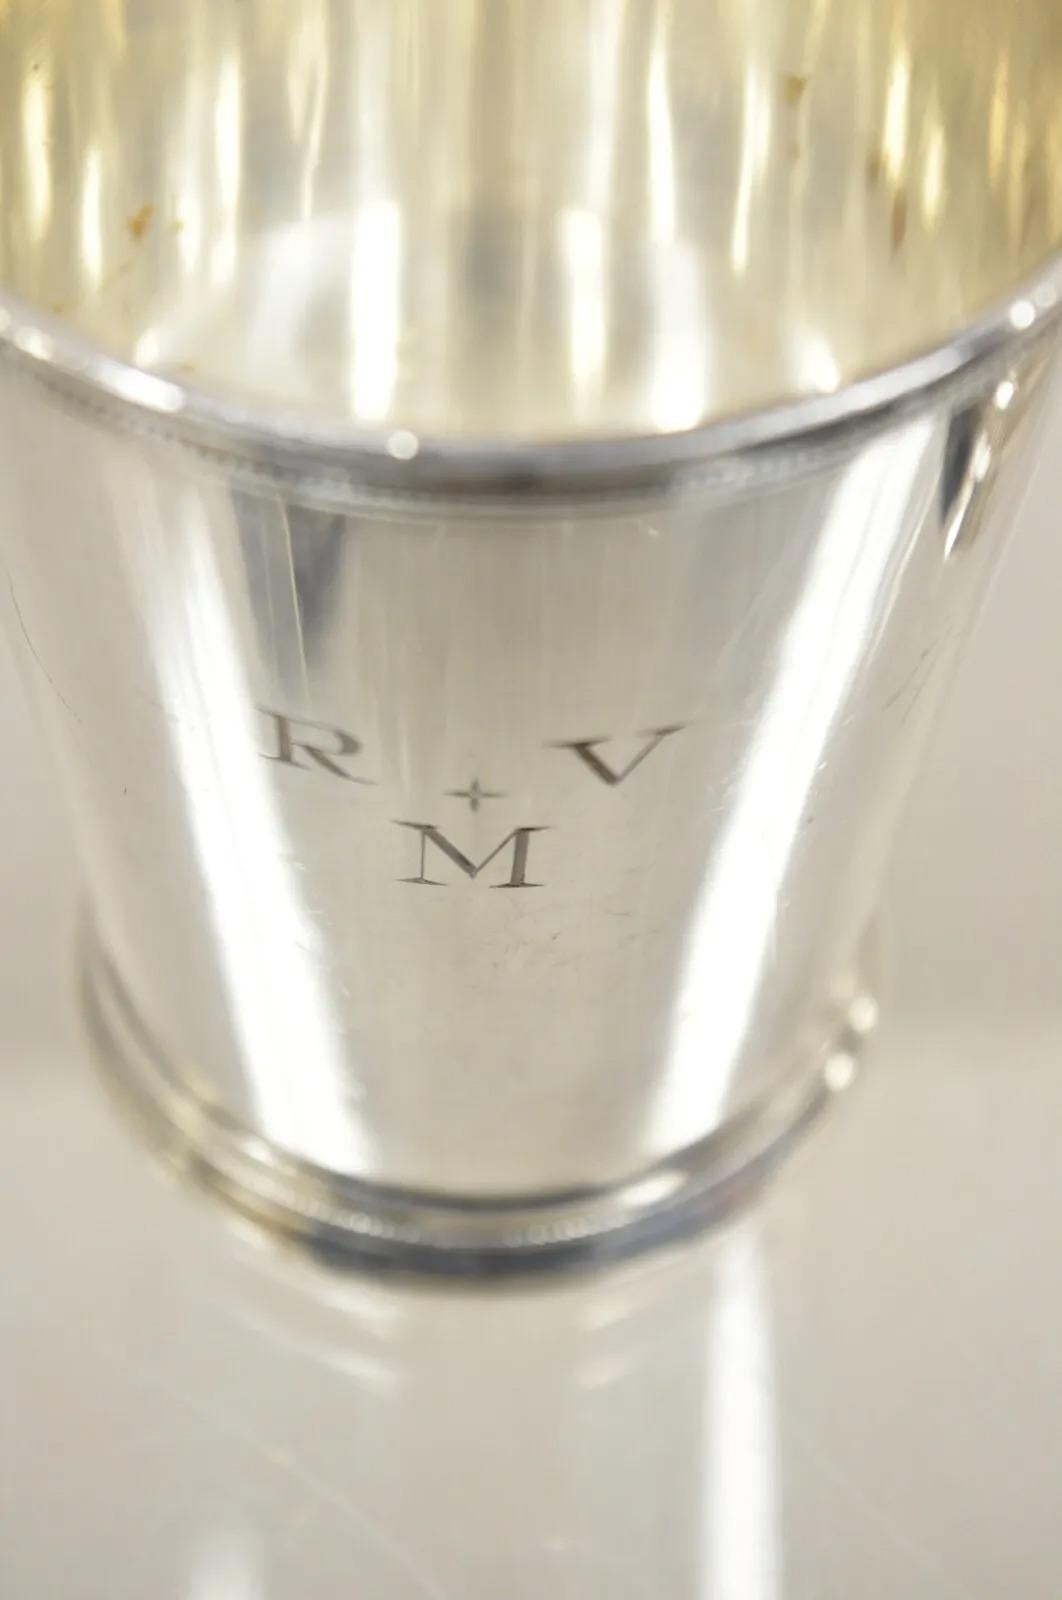 Victorian 2 Vintage Silver Plated Mint Julep Cups Tumblers 1 with Monogram - 2 Pieces For Sale